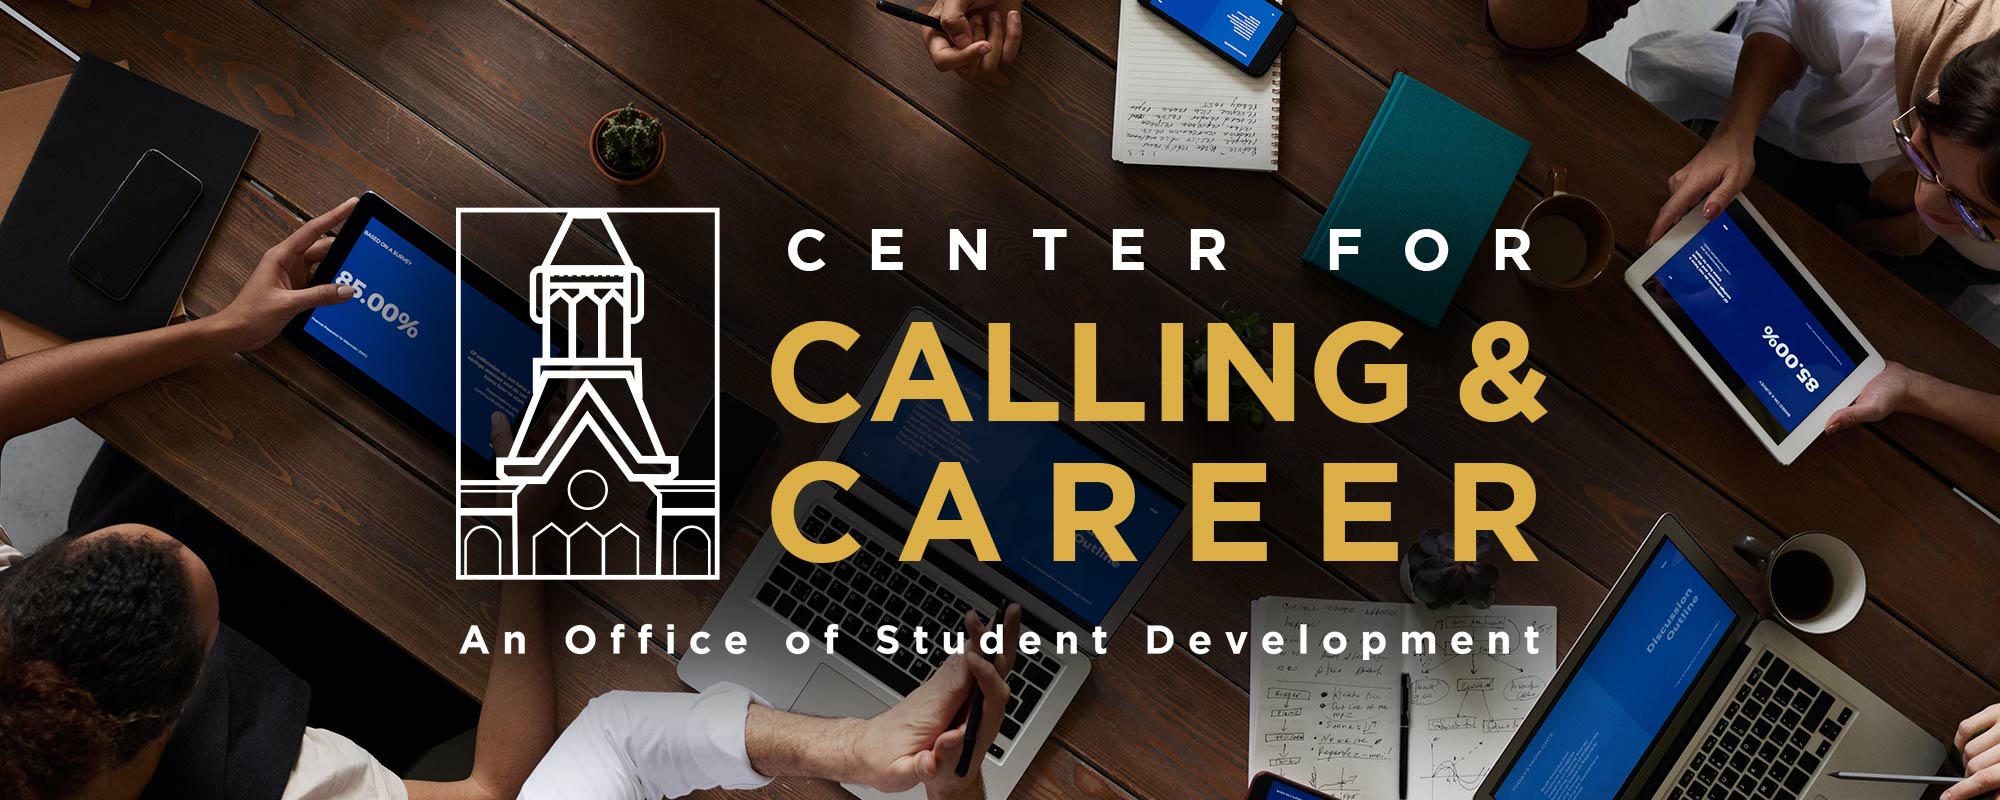 Center for Calling and Career